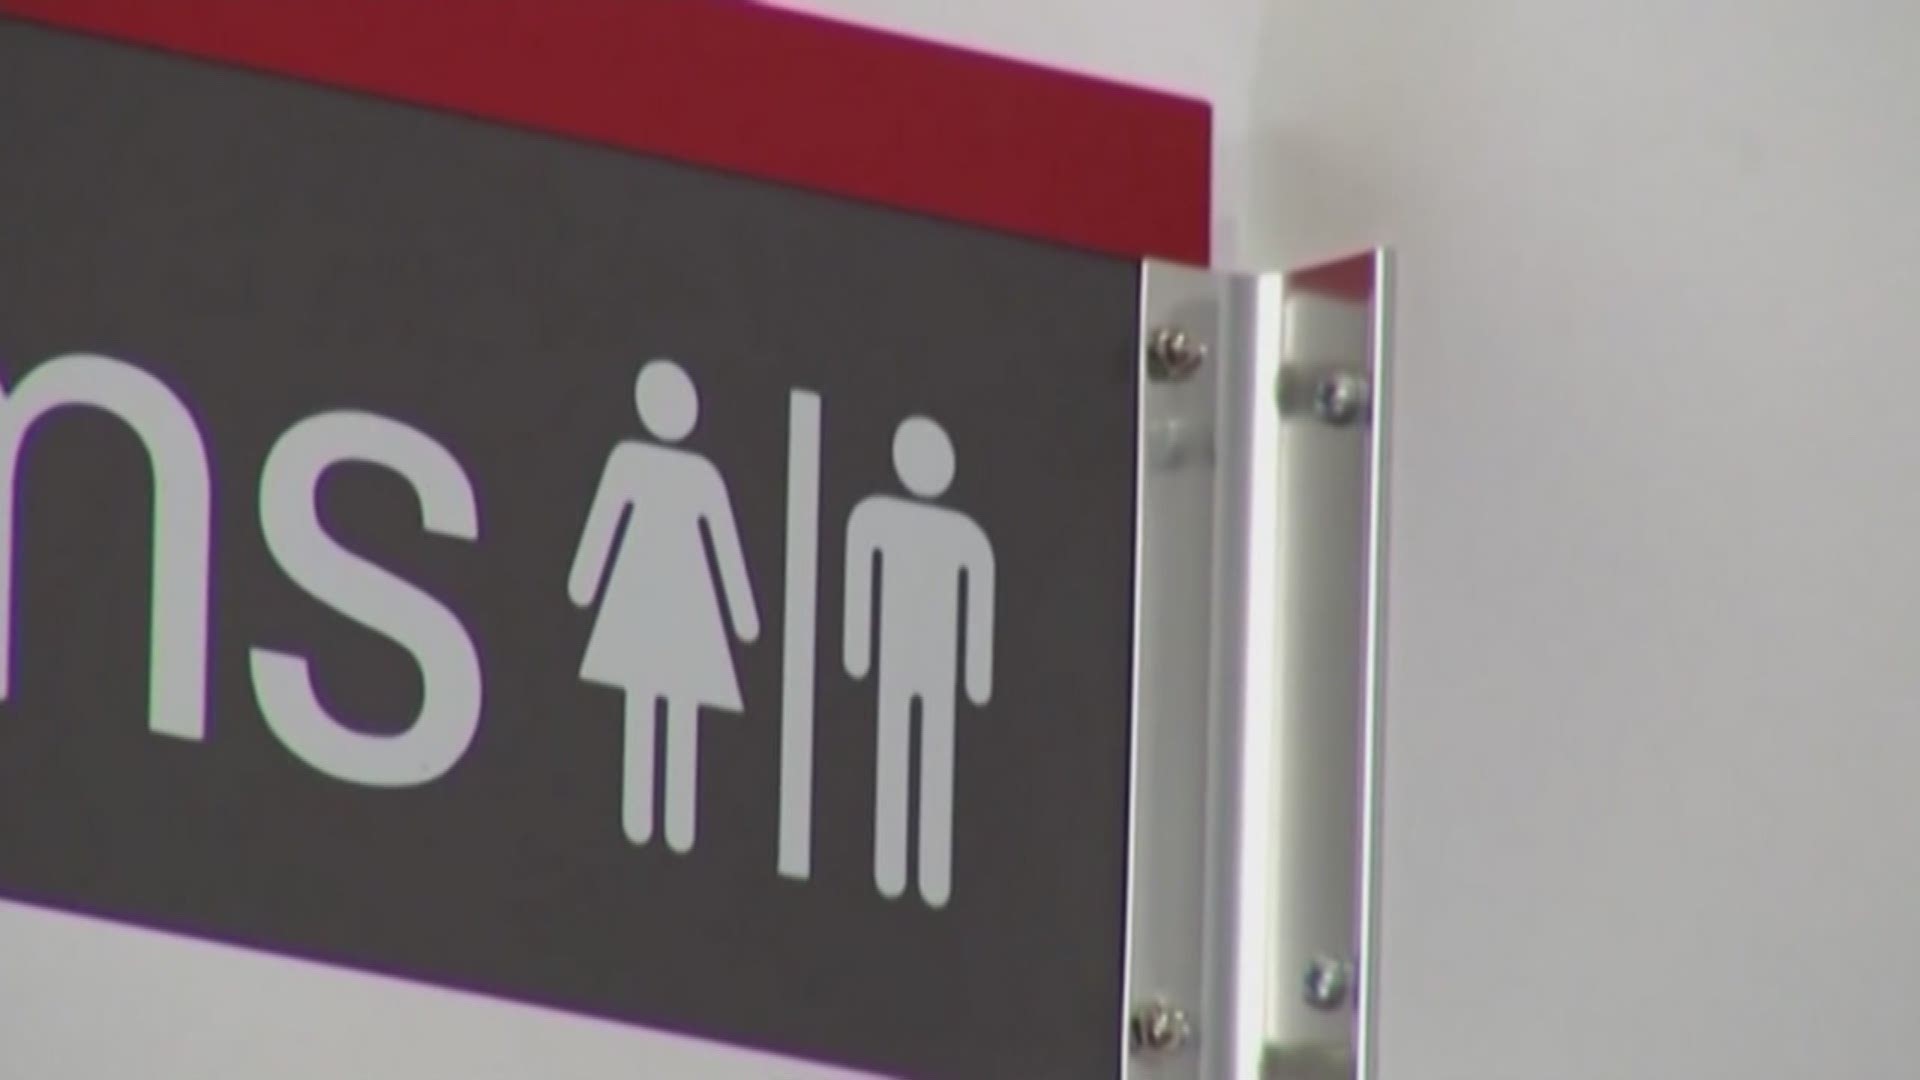 More than 250 people from around the state traveled to Austin on Friday, most of them planning to speak out against the highly controversial bathroom bill. 